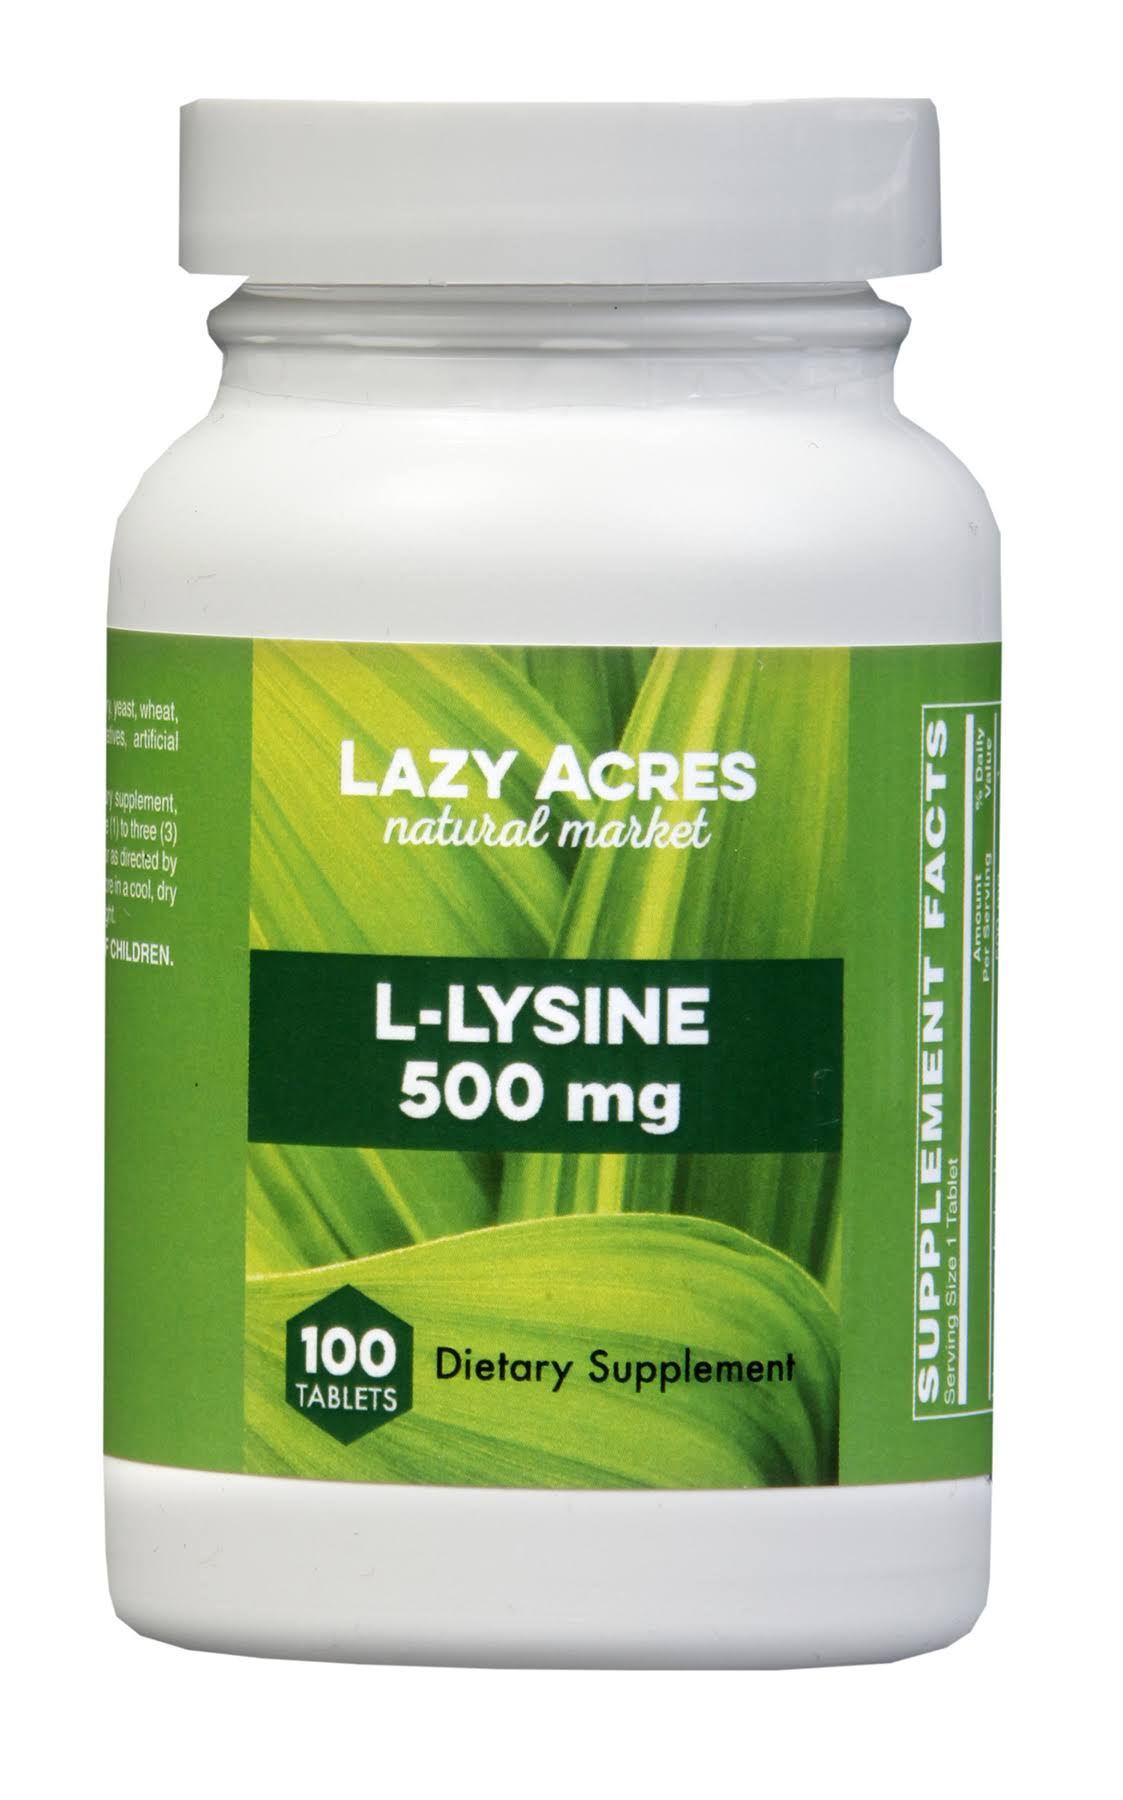 Holly Hill Health Foods, L-Lysine 500 mg, 100 Tablets